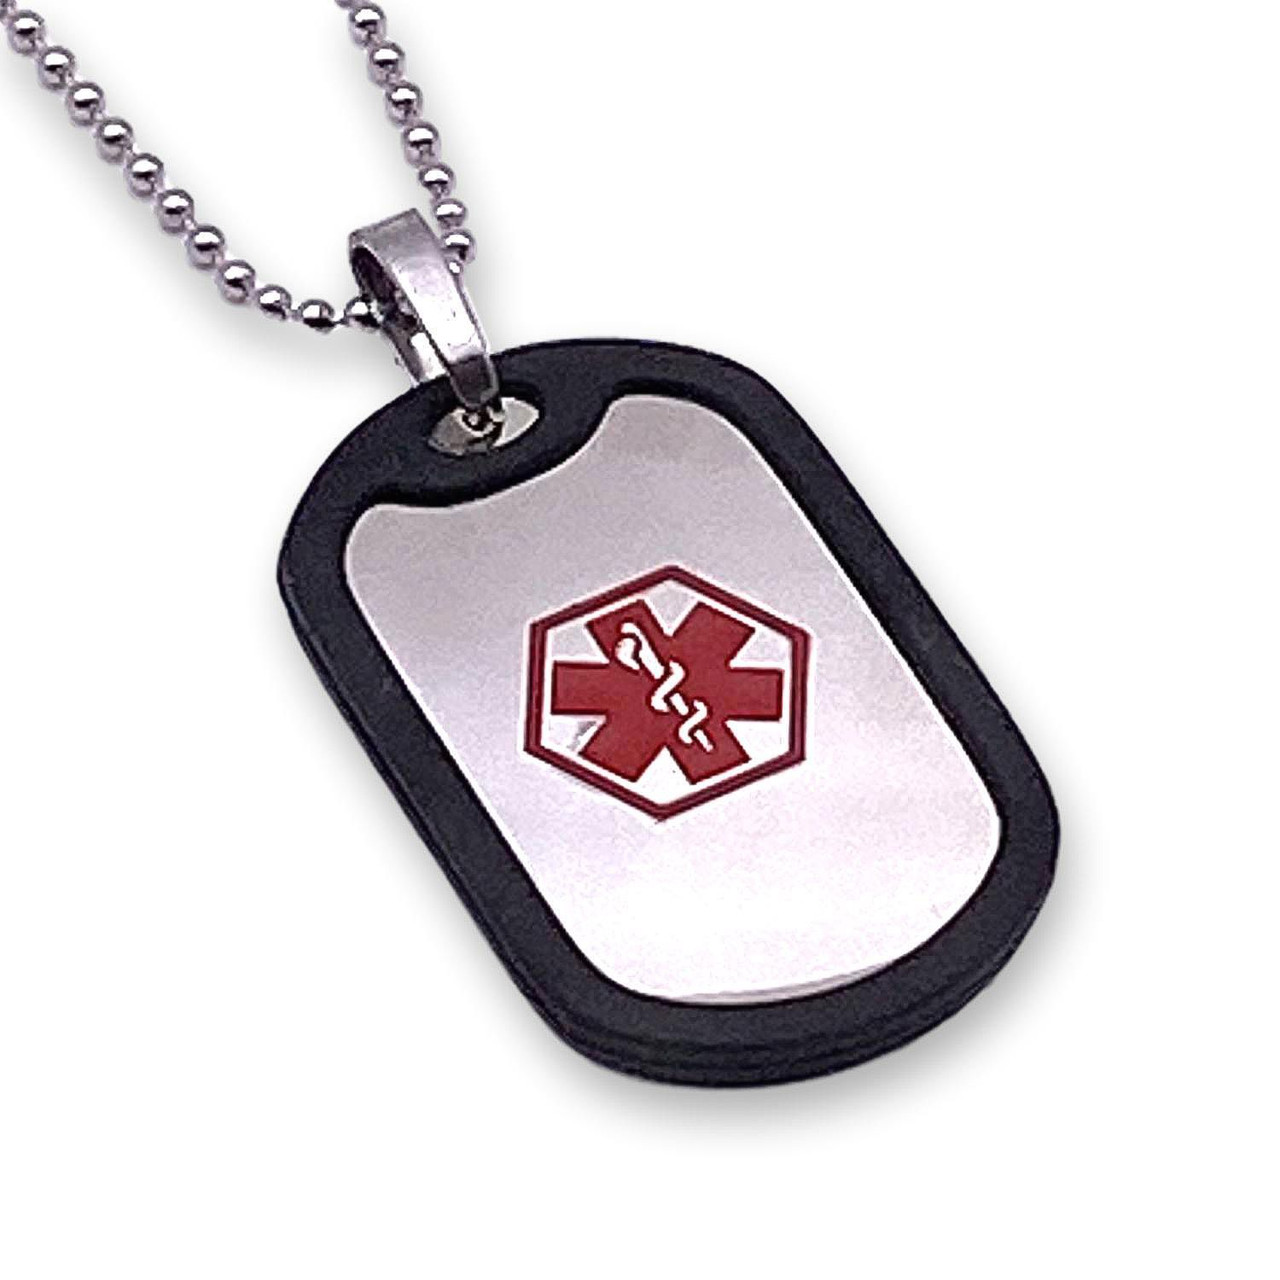 Dog Tag Medical Alert Necklace Stainless Steel Medical Alert Dog Tag with Beaded  Chain – Universal Medical Data